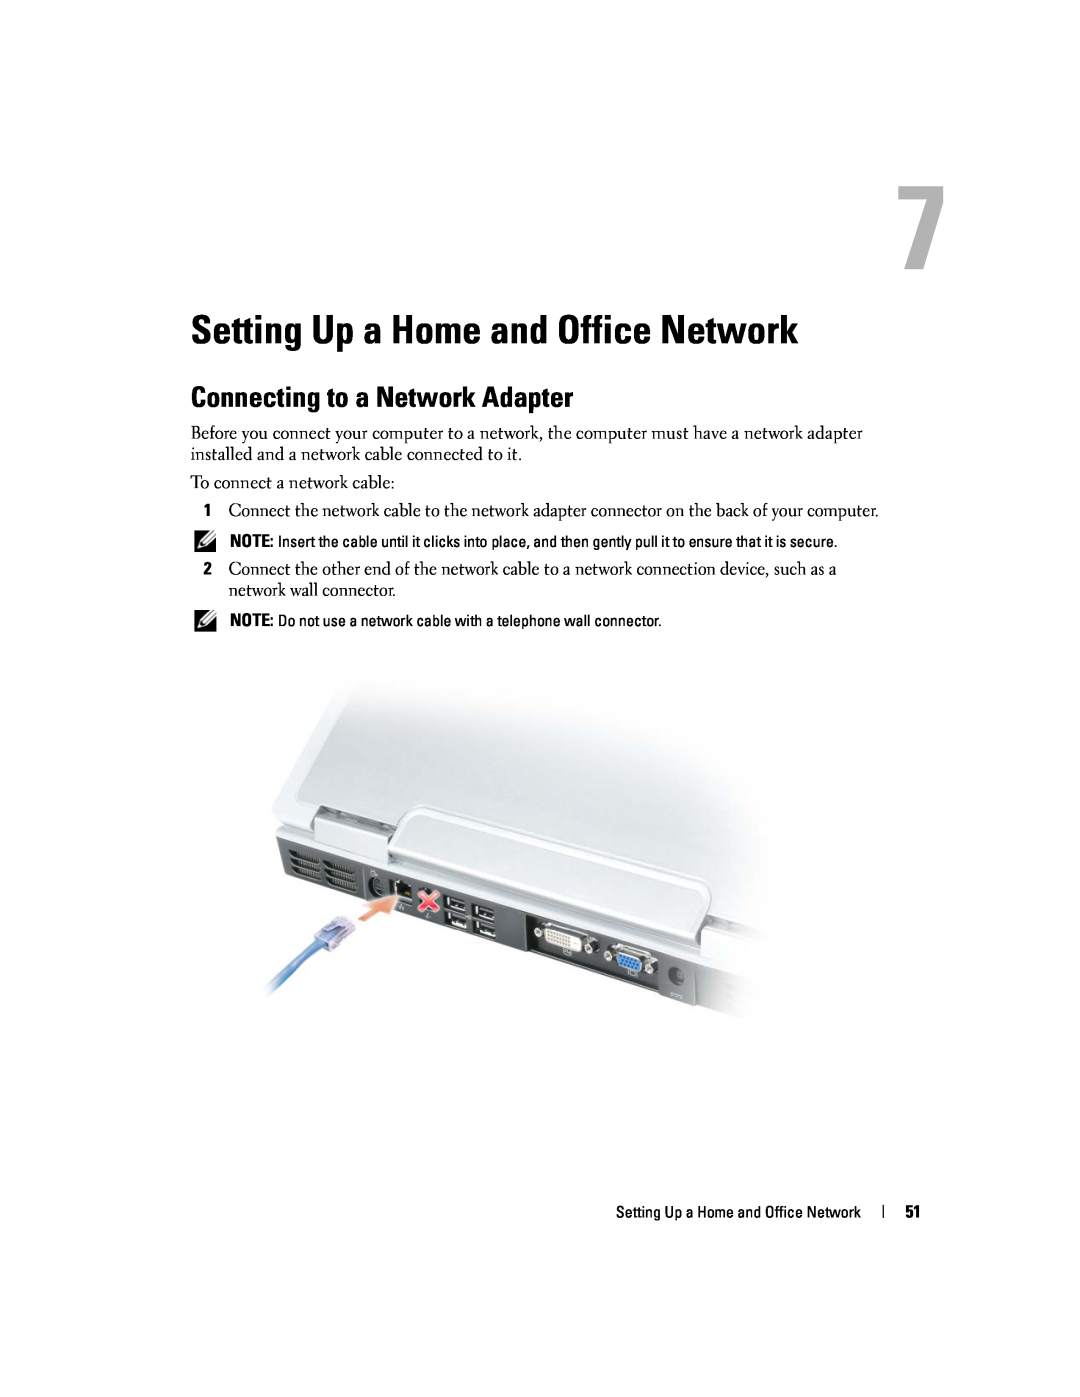 Dell 9300 owner manual Setting Up a Home and Office Network, Connecting to a Network Adapter 